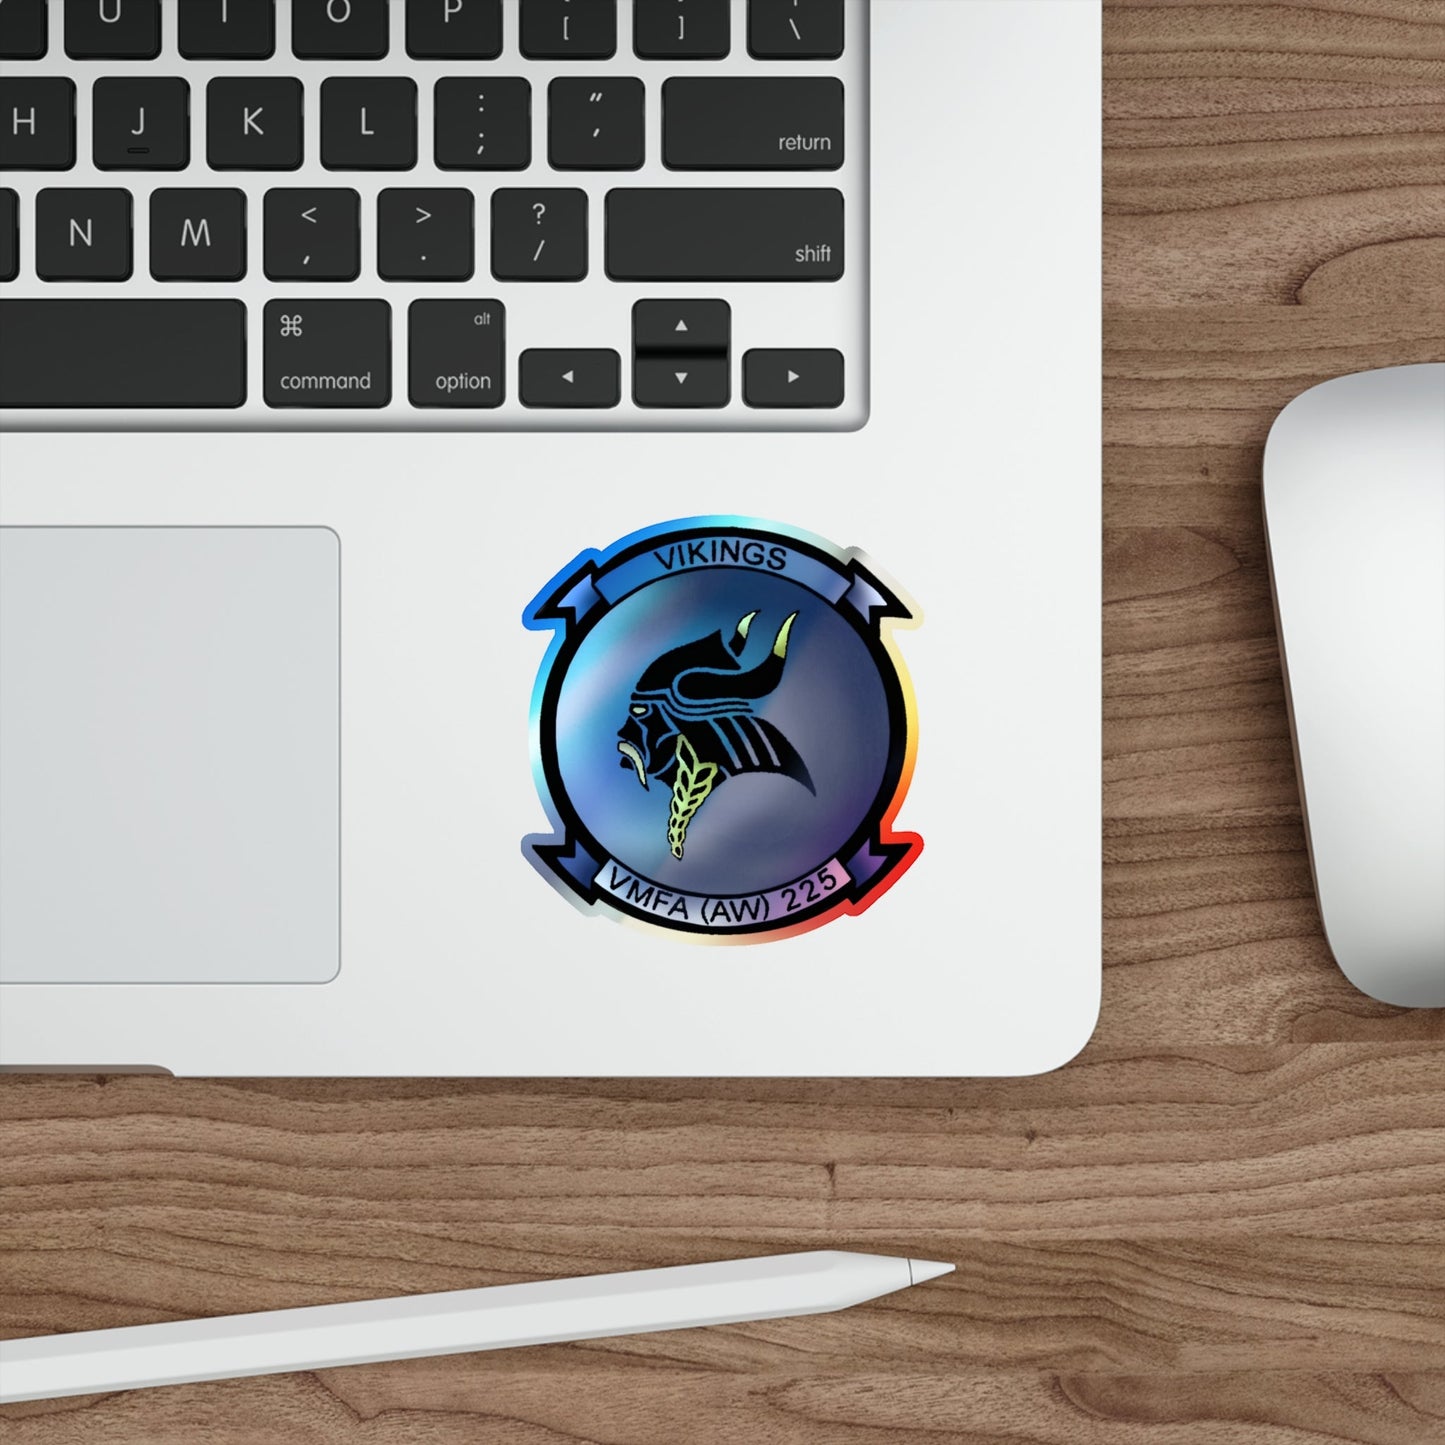 VMFAAW 225 Marine All Weather Fighter Attack Squadron 225 (USMC) Holographic STICKER Die-Cut Vinyl Decal-The Sticker Space